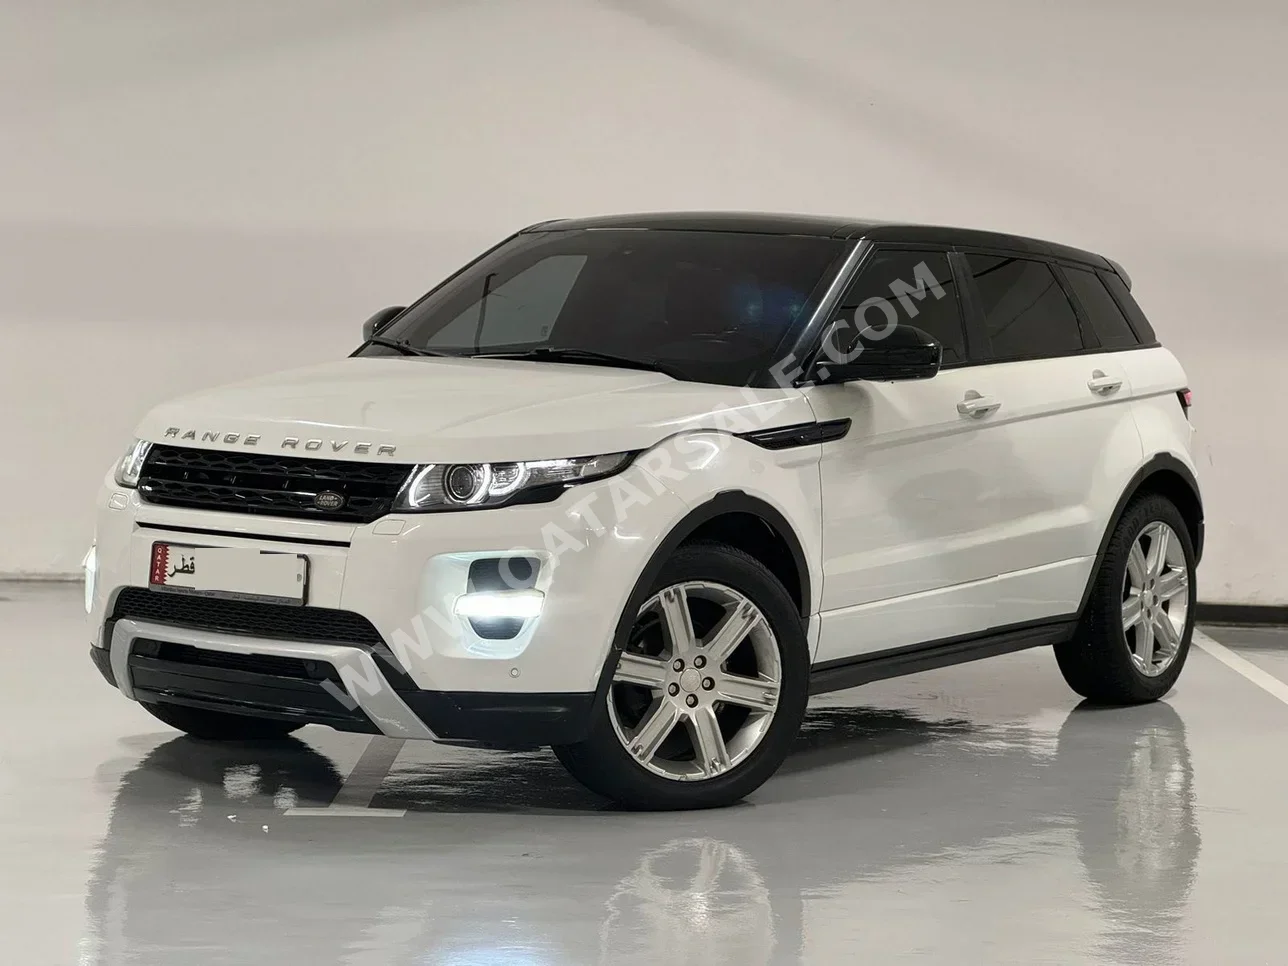 Land Rover  Evoque  2015  Automatic  99,000 Km  4 Cylinder  Four Wheel Drive (4WD)  SUV  White